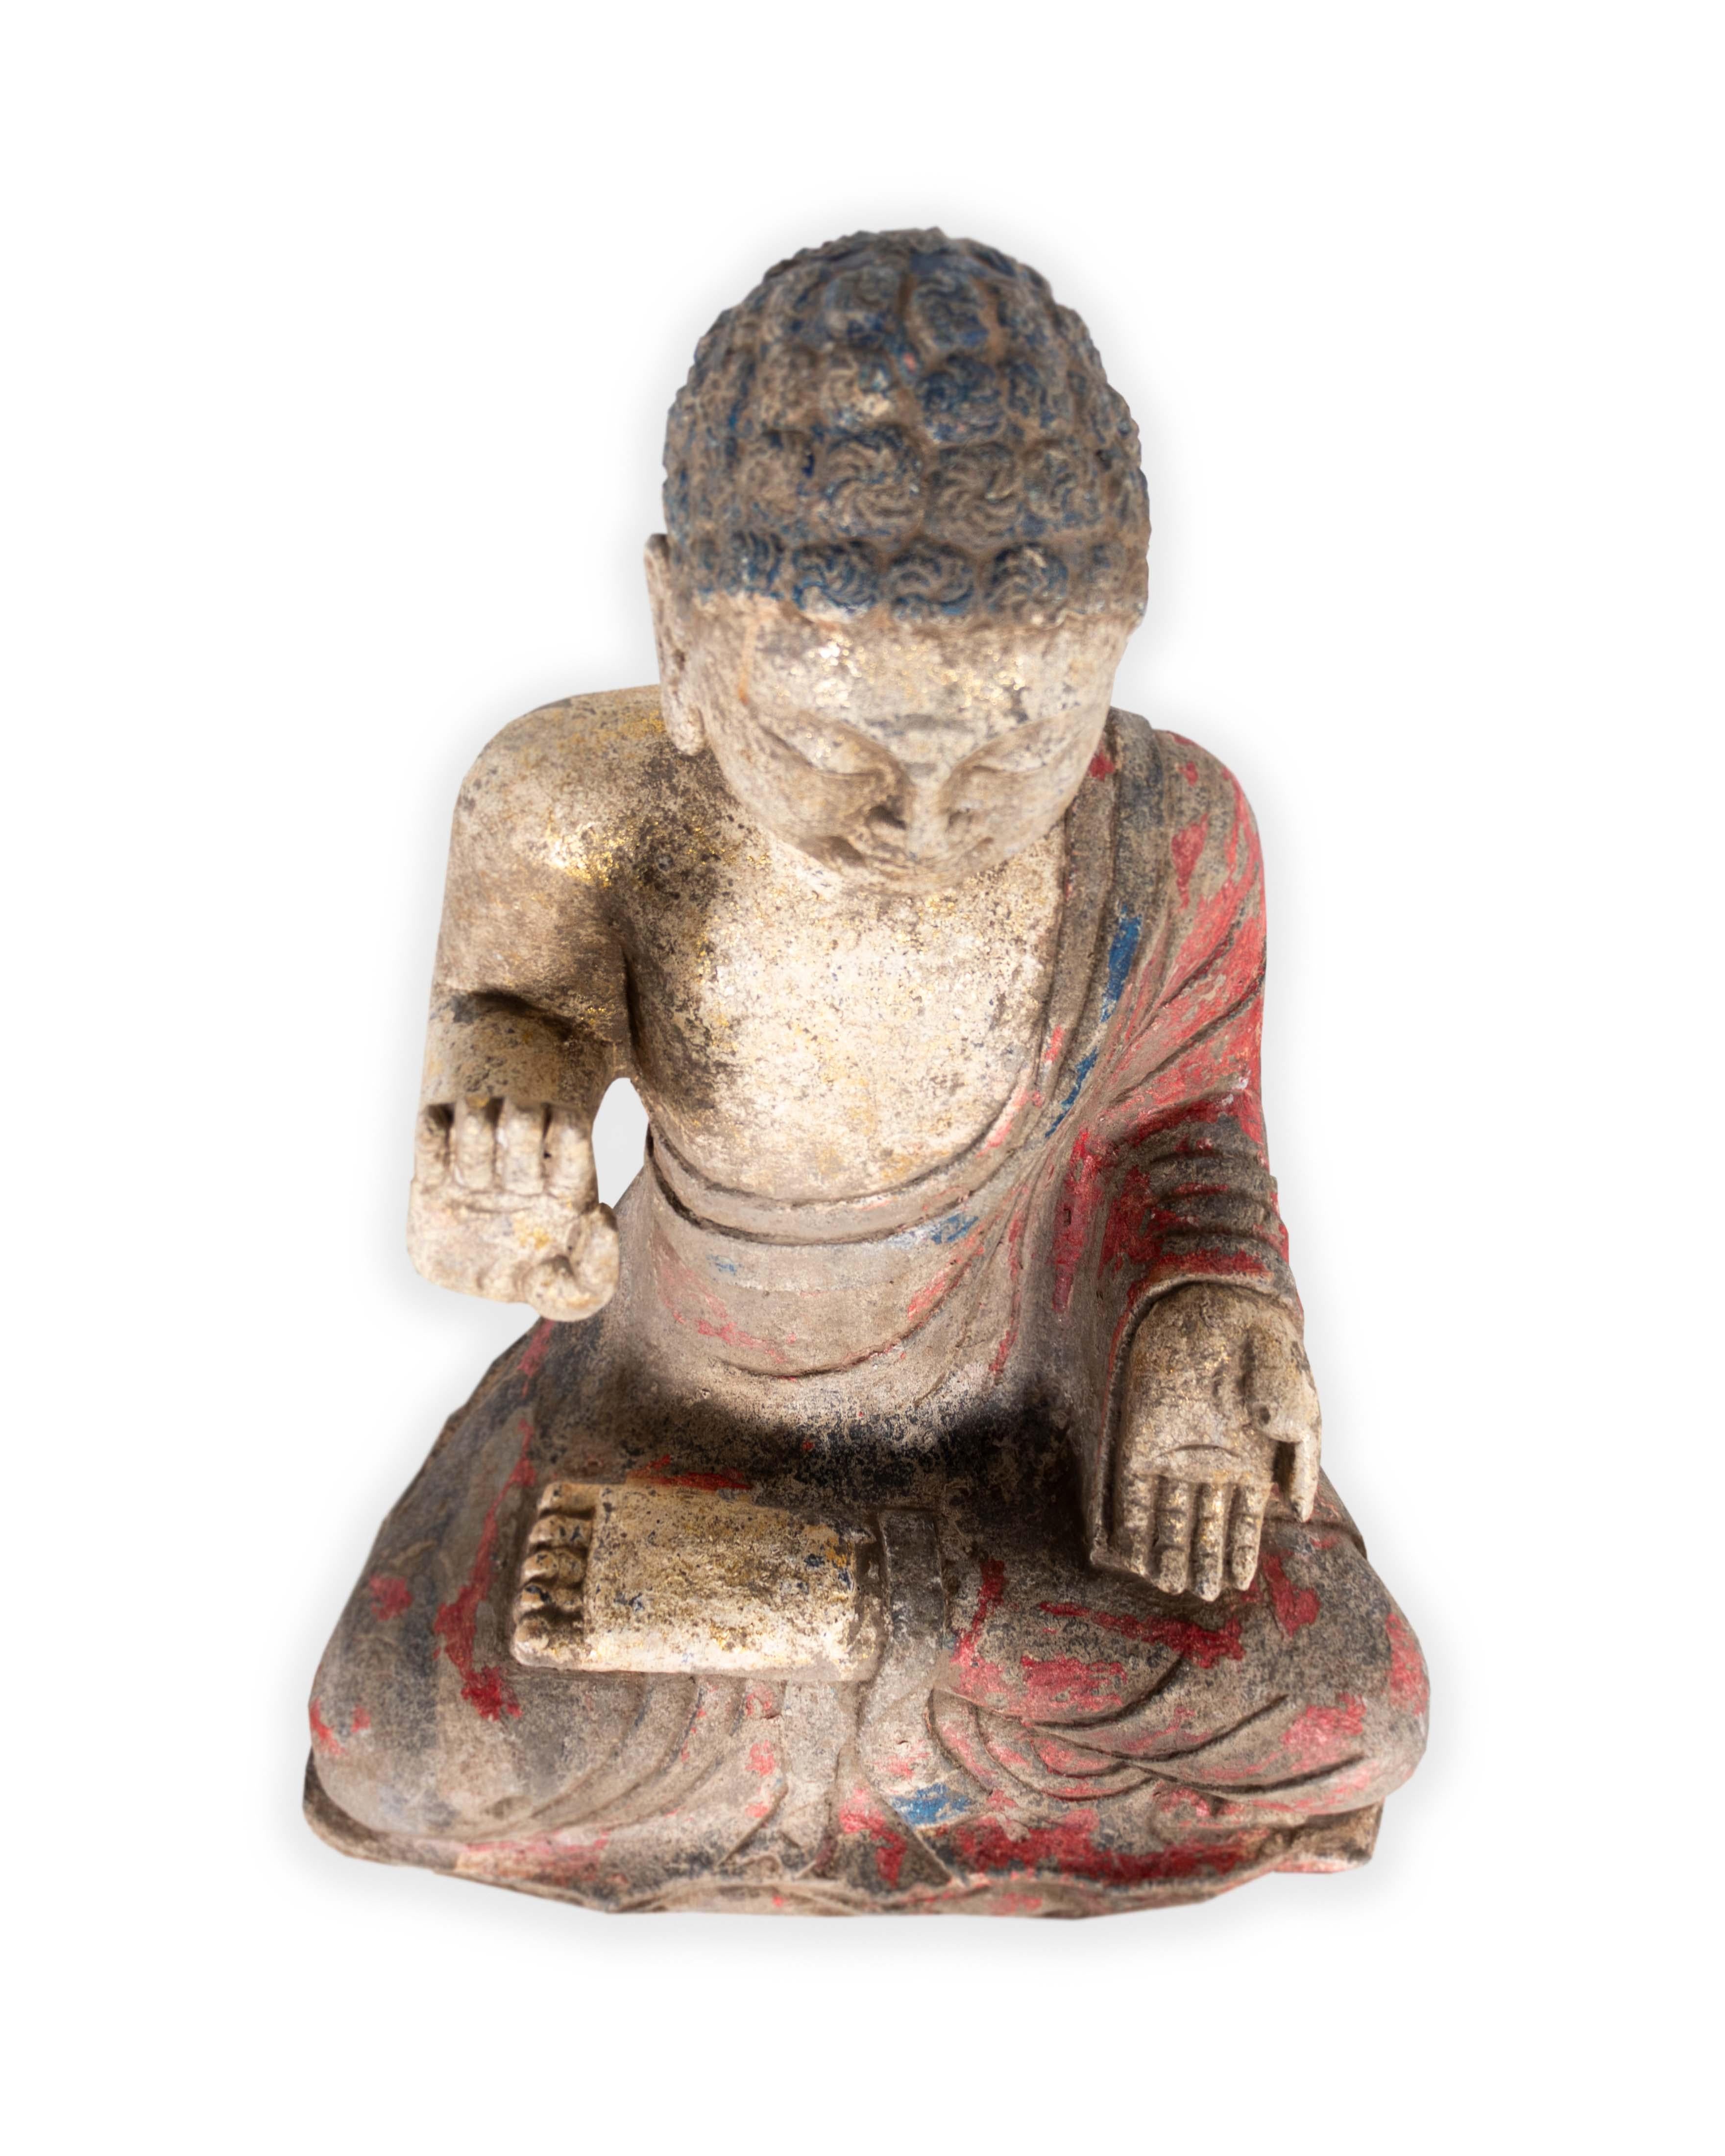 Stone seated Buddha with pigmented decoration. 

A Piece from the Estate Collection. Exclusive to Brendan Bass.